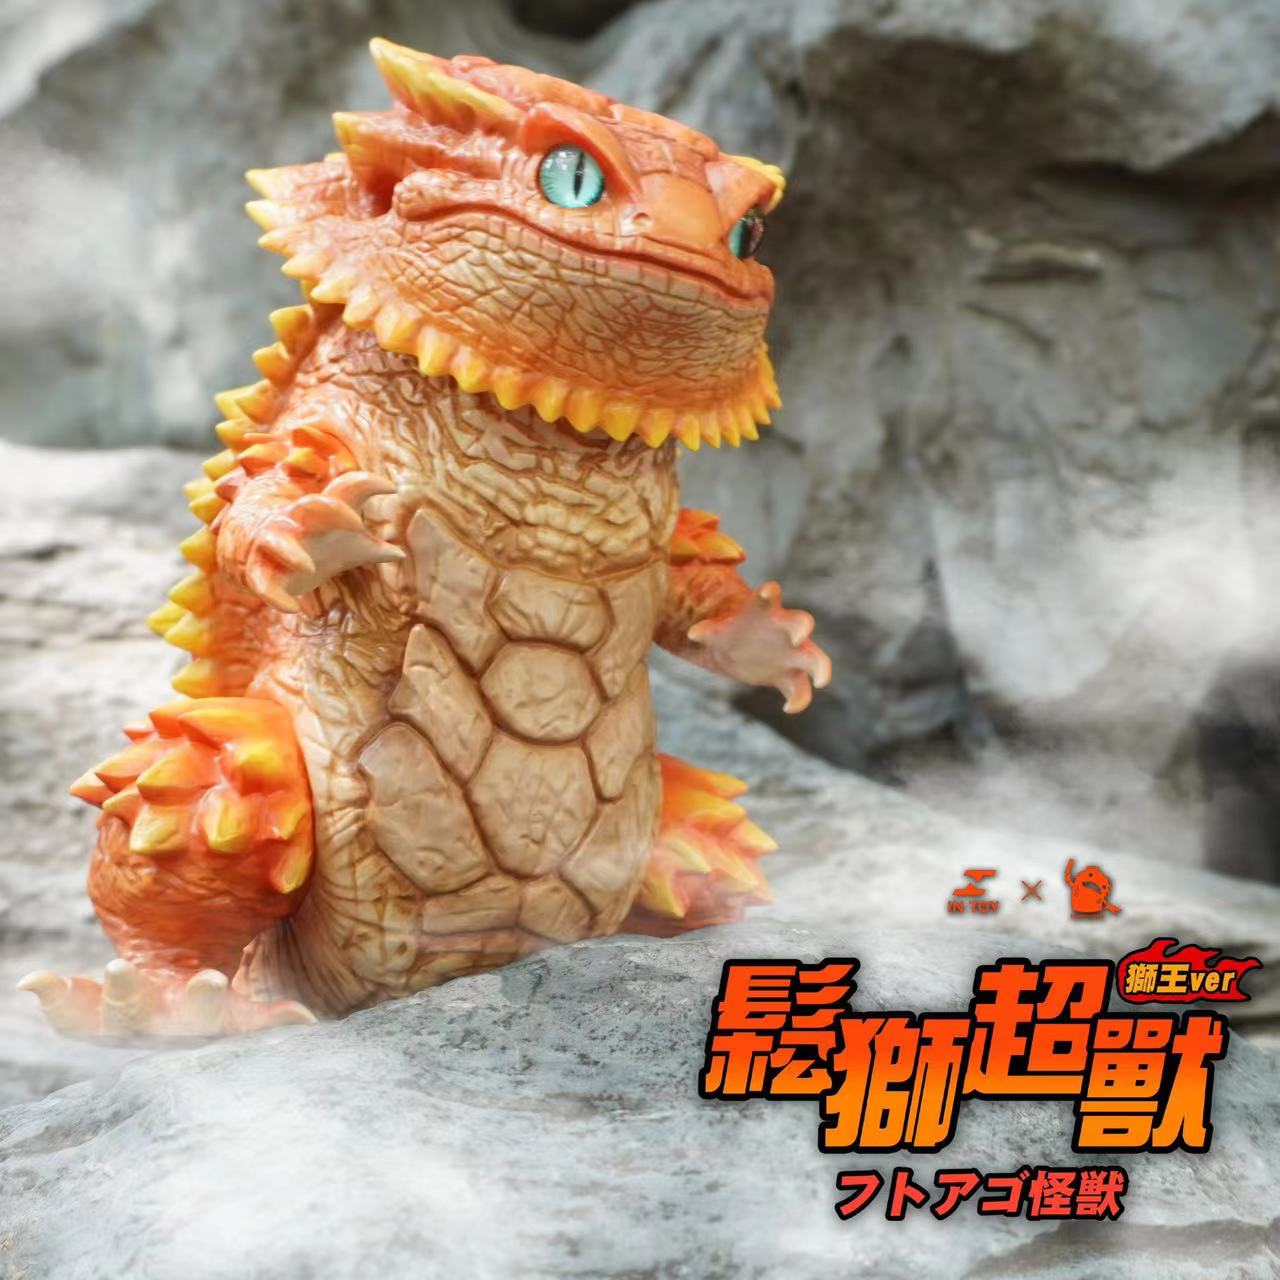 Bearded Dragon Super Beast by INTOY X Monster Hero